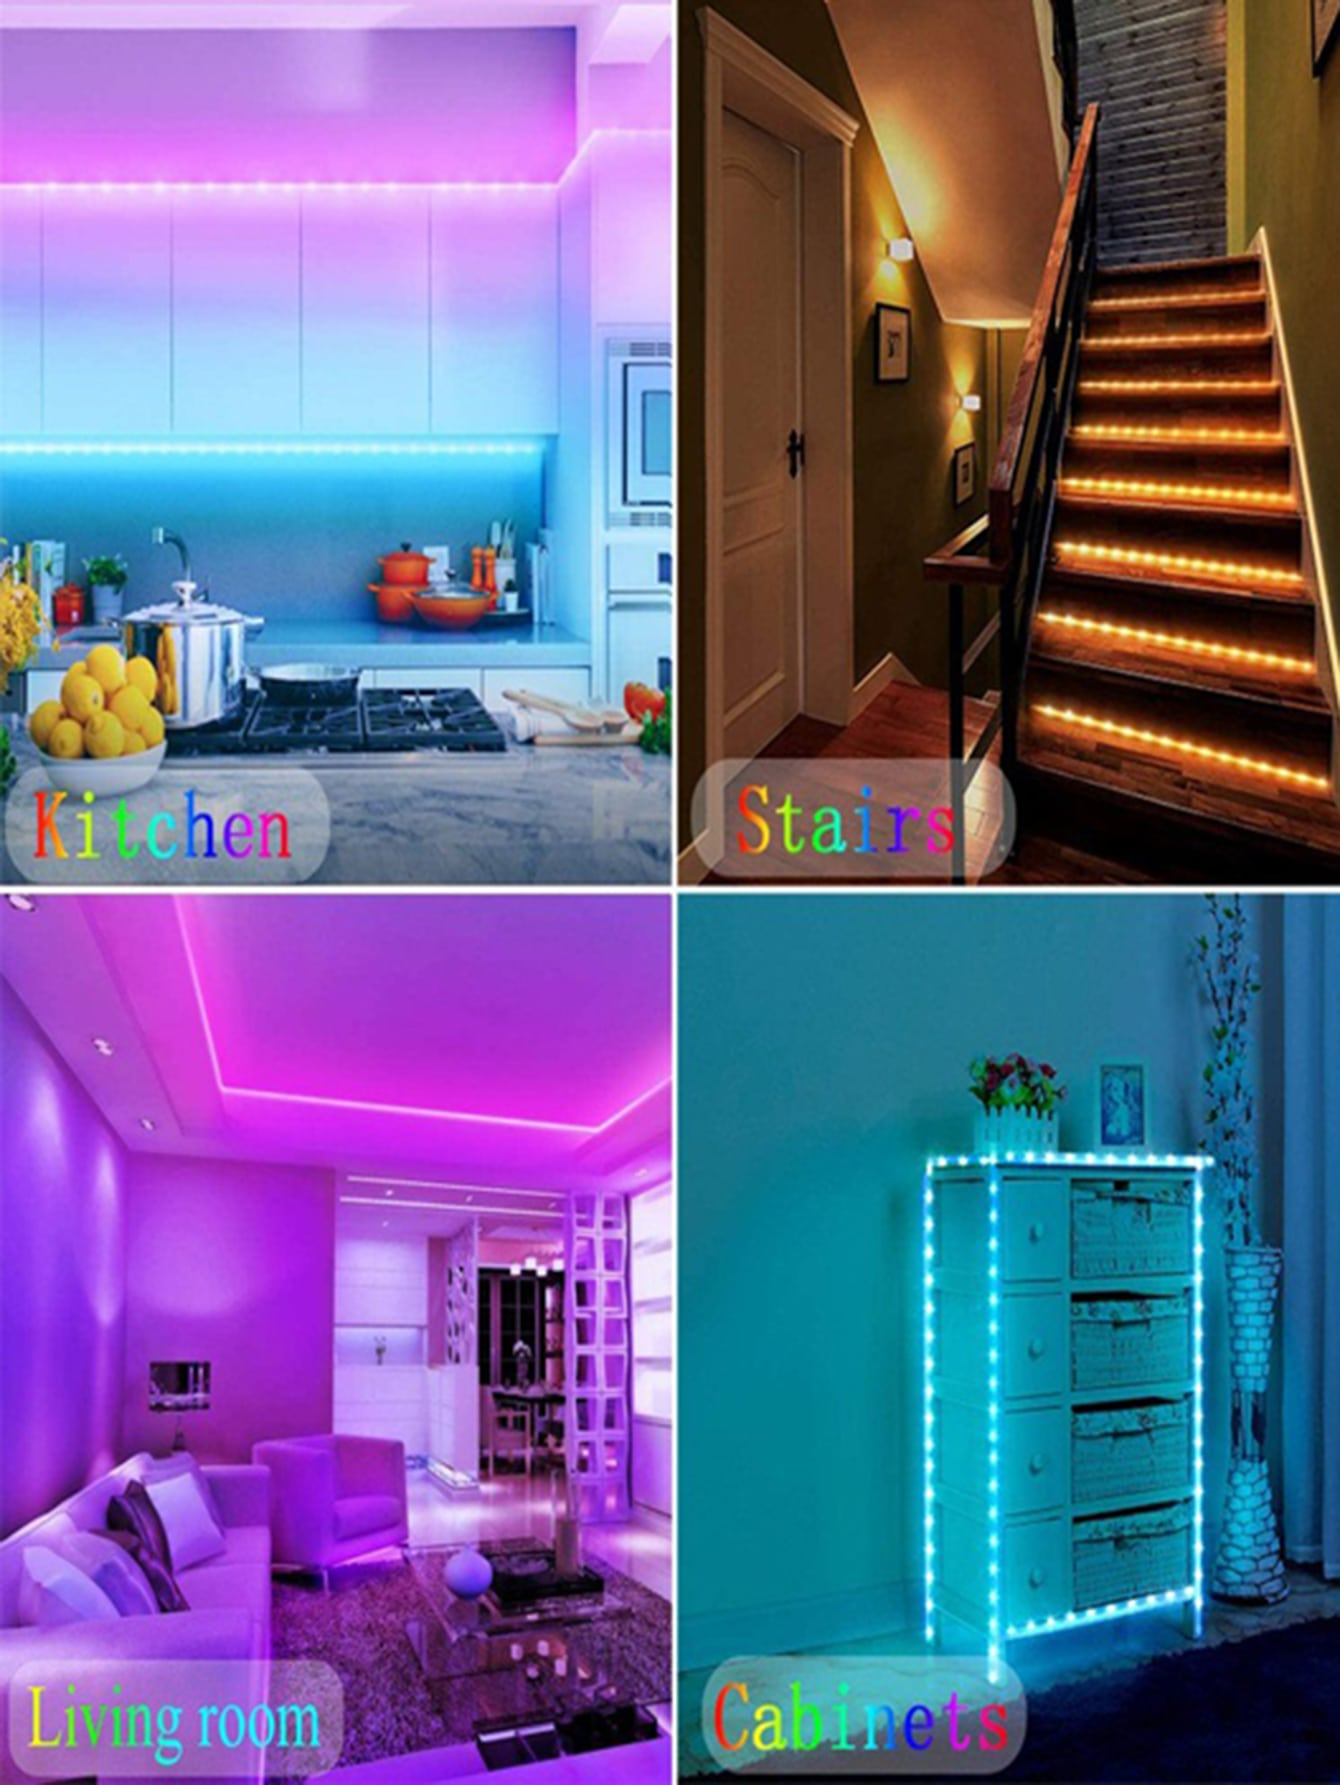 LED light strip for Cabinet Lighting DIY projects